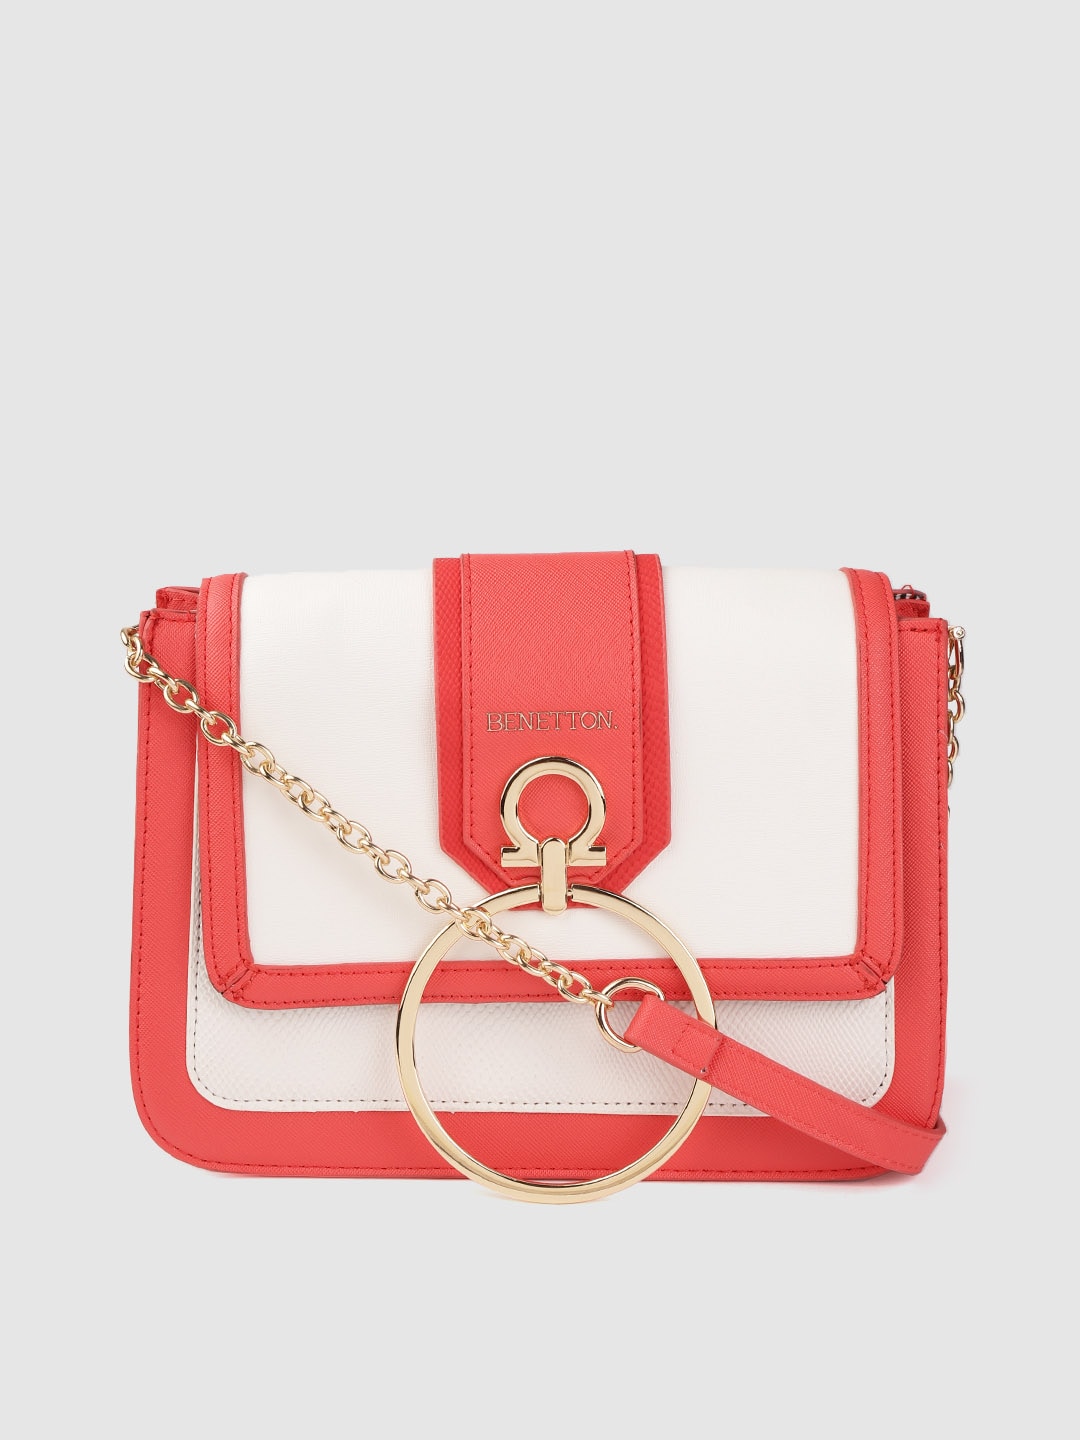 United Colors of Benetton White & Red Snakeskin Textured Sling Bag Price in India